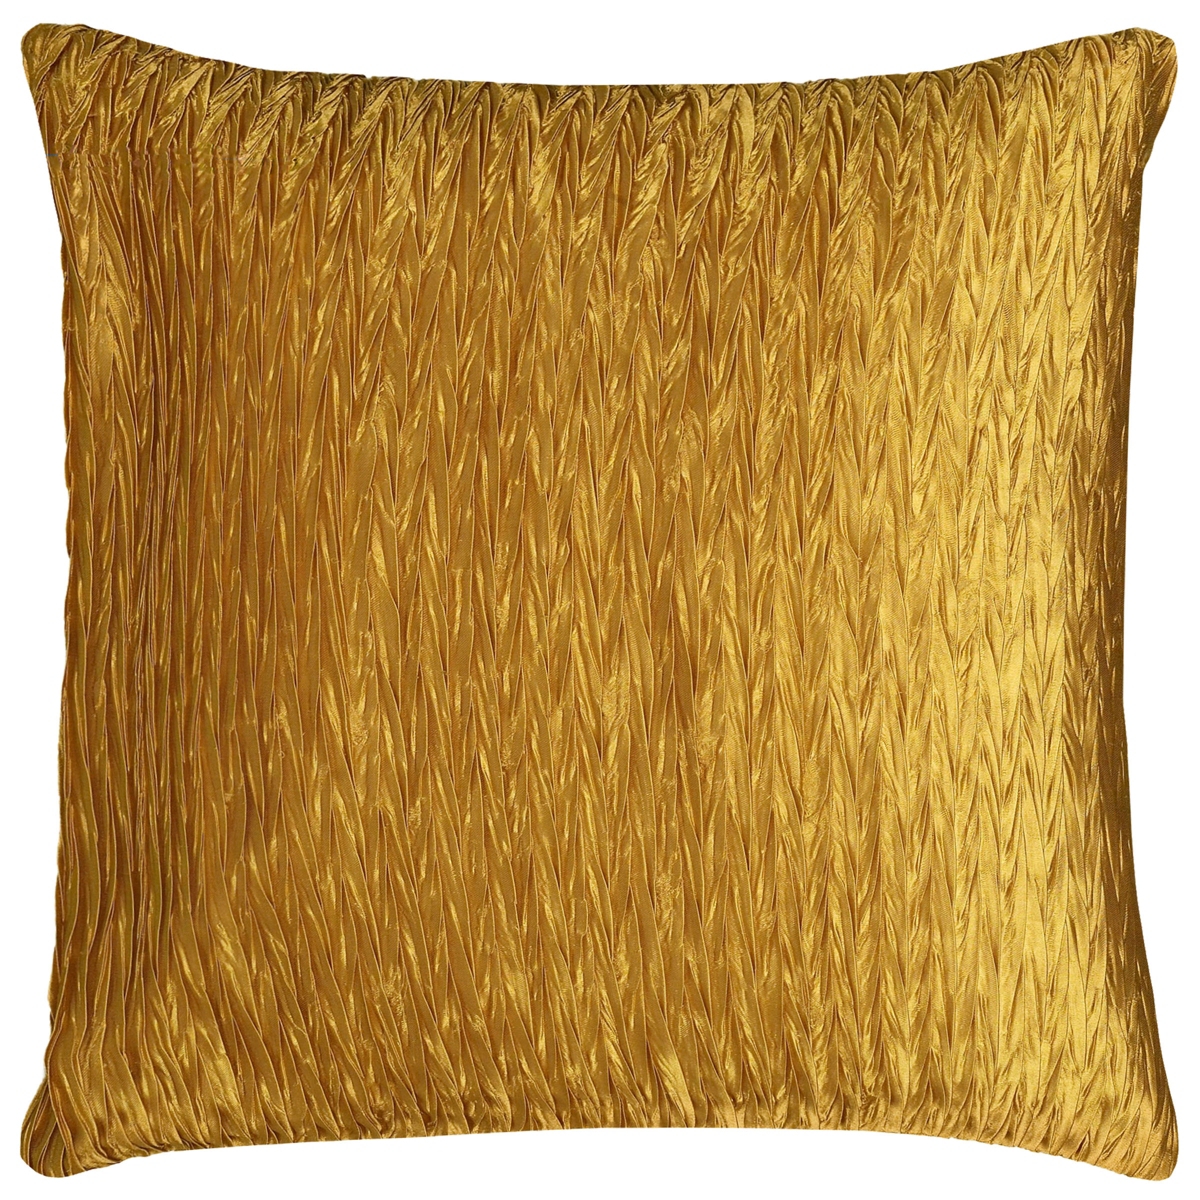 Rizzy Home Braided Solid Polyester Filled Decorative Pillow, 18" X 18" In Mustard